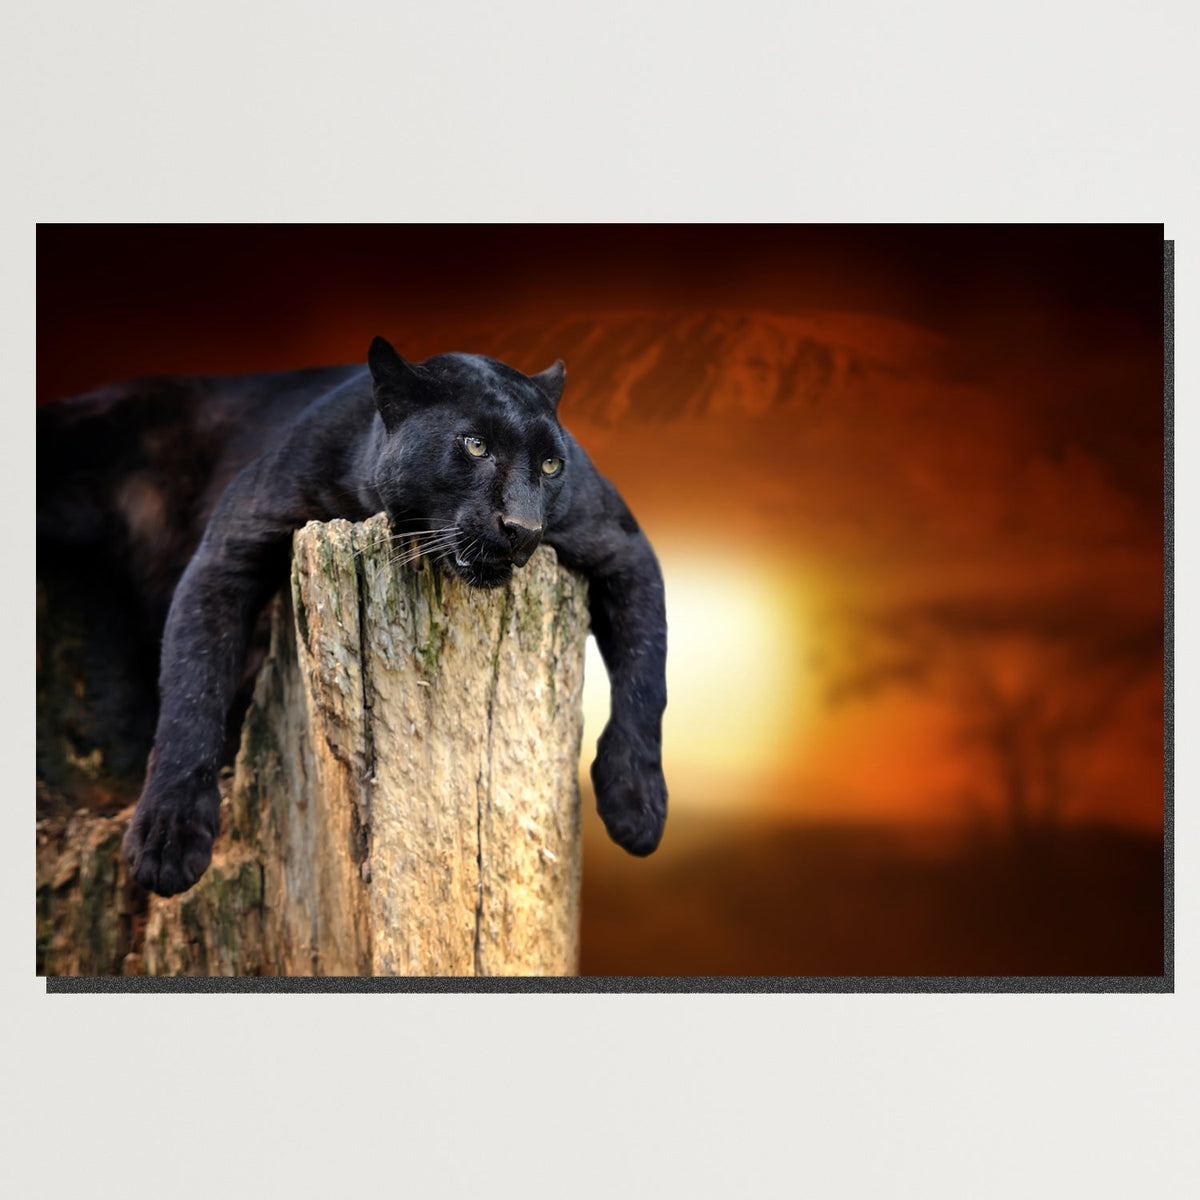 https://cdn.shopify.com/s/files/1/0387/9986/8044/products/LazyPantherCanvasArtprintStretched-Plain.jpg